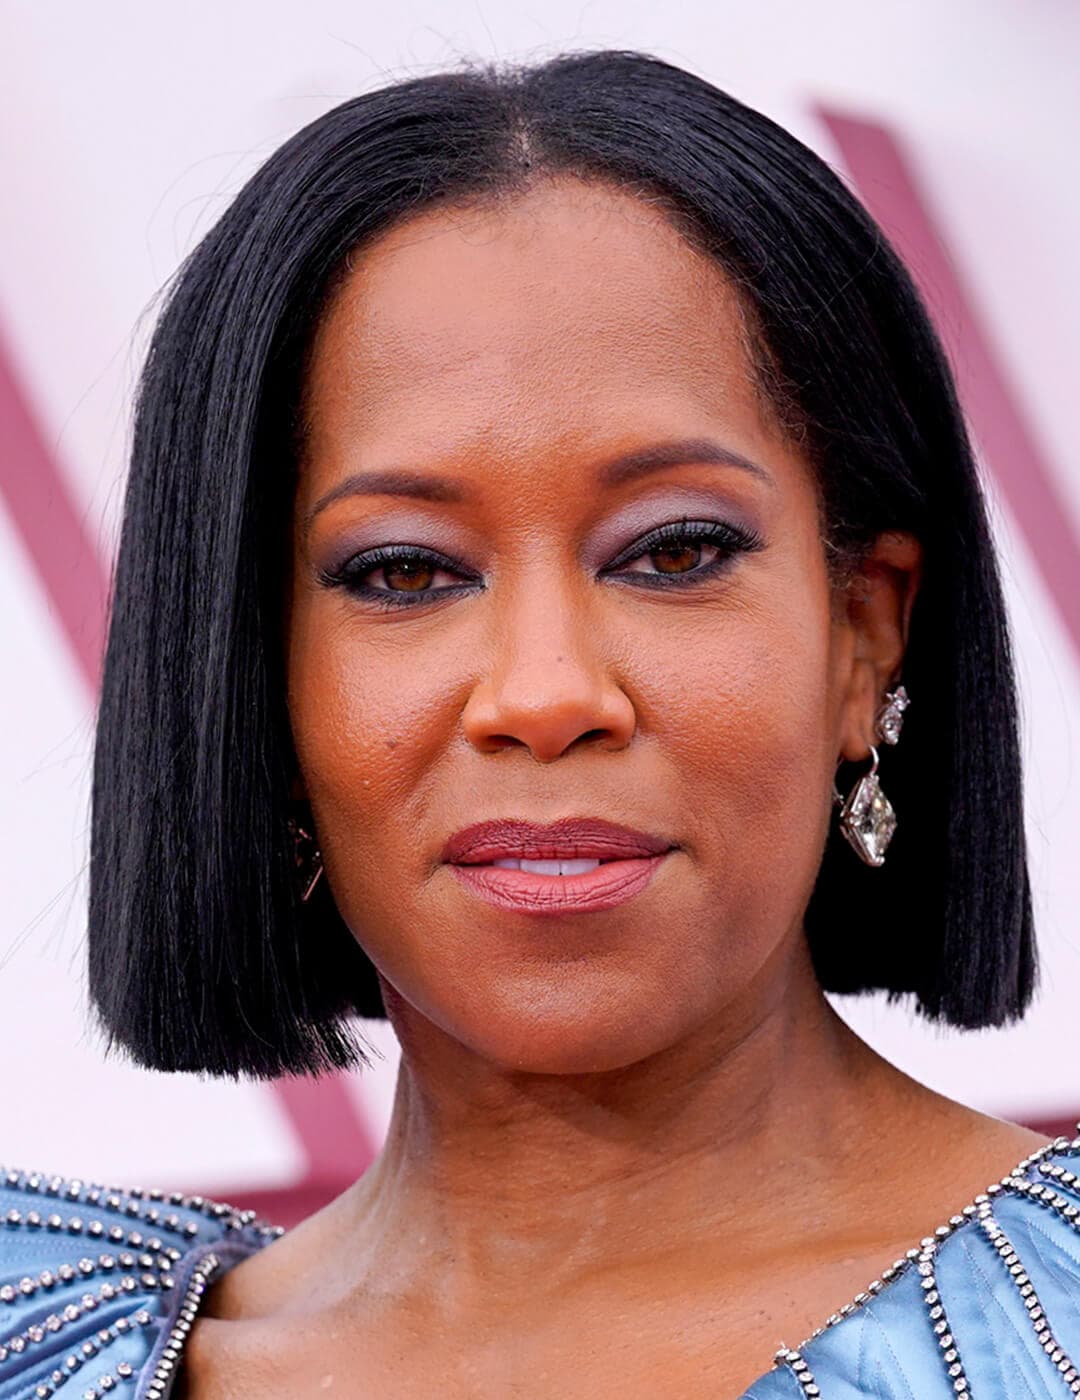 A photo of Regina King showcasing her straight, black bob haircut on a pink background